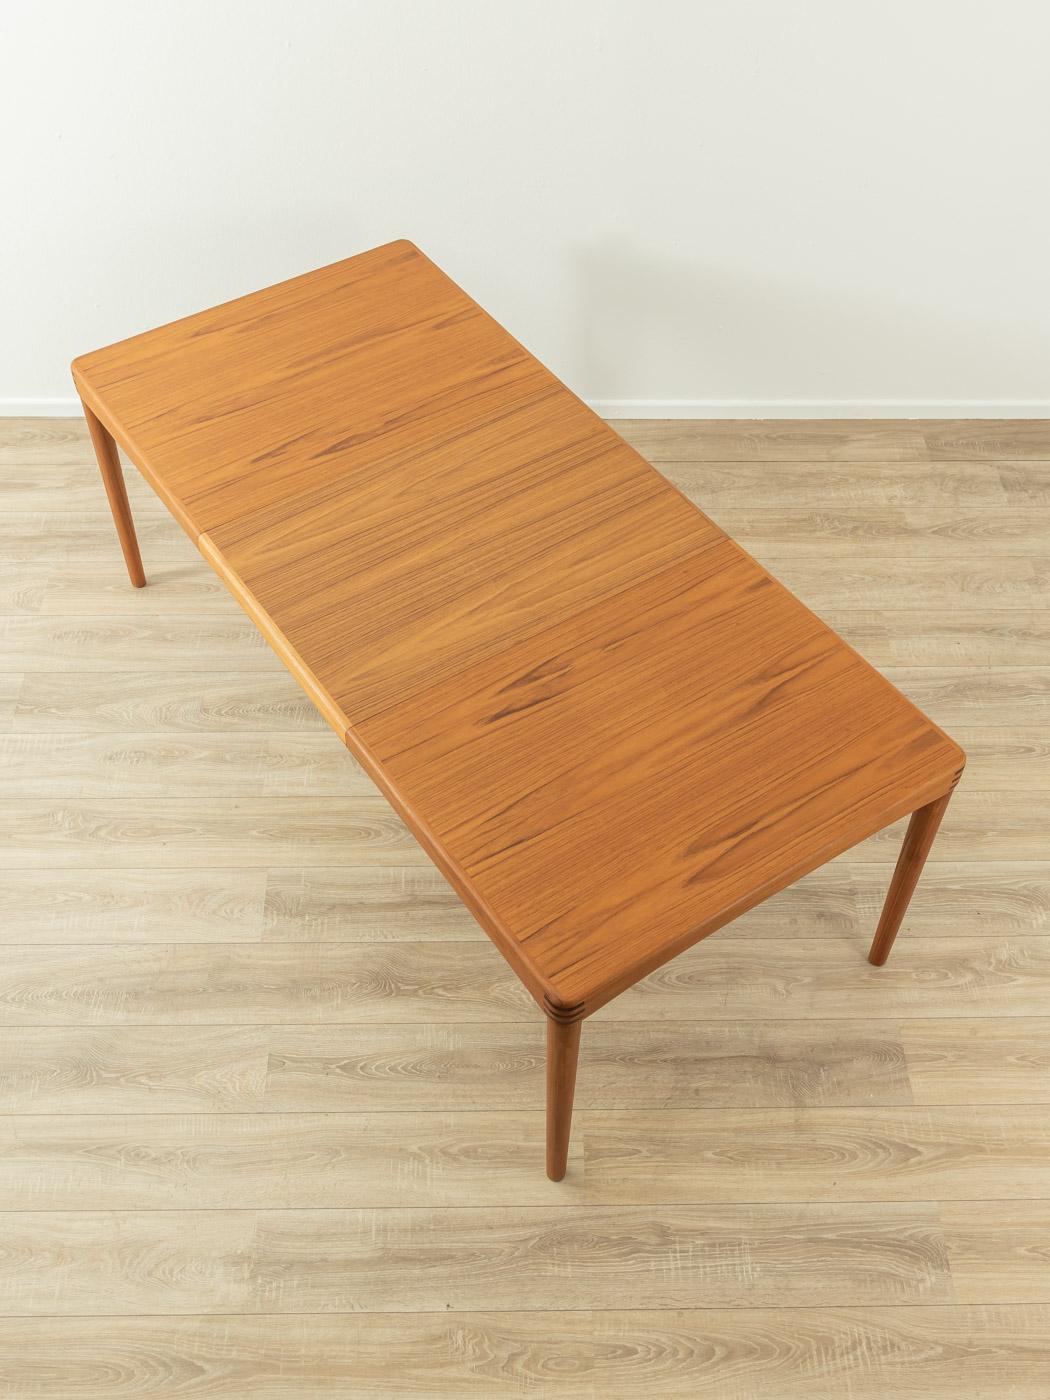 Classic teak dining table from the 1960s by H.W. Klein for Bramin. Solid frame and veneered table top with solid wood edge. The insert plate can be stowed under the table top
Quality Features:

 accomplished design: perfect proportions and